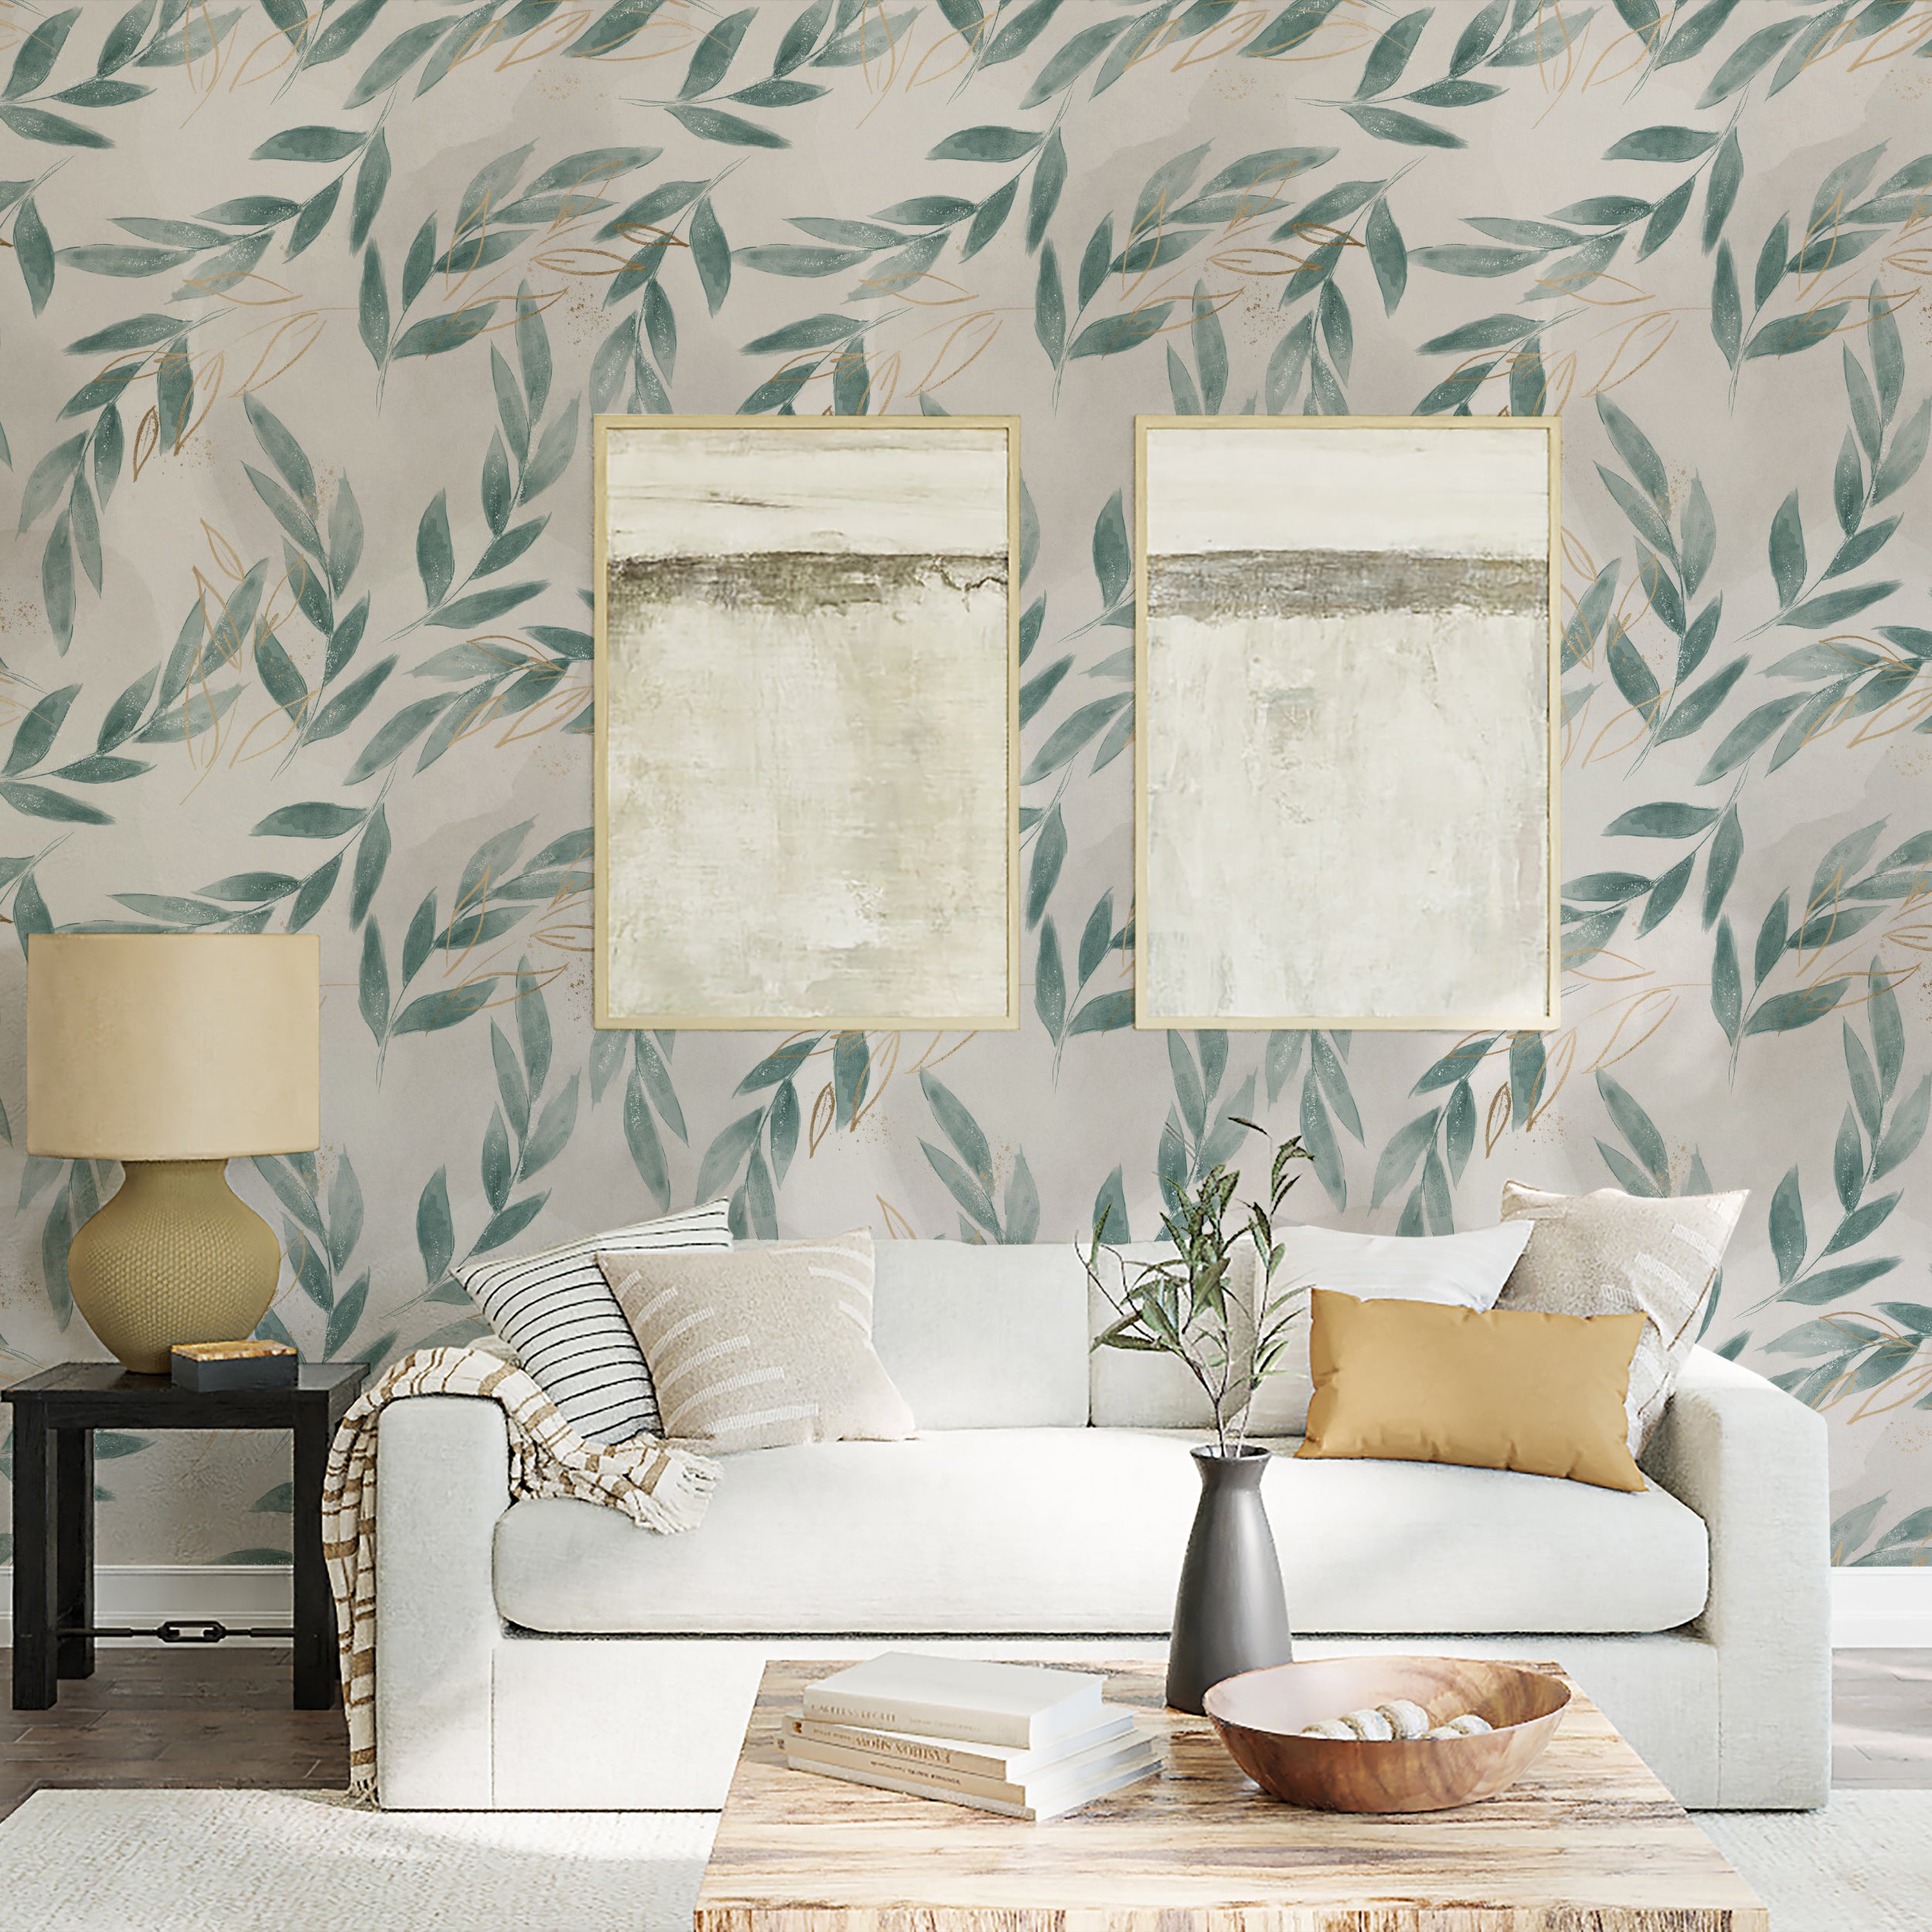 A contemporary living room enhanced by Shimmering Floral Wallpaper, showcasing a tranquil leaf pattern in teal and gold, perfectly complementing modern furnishings and neutral tones